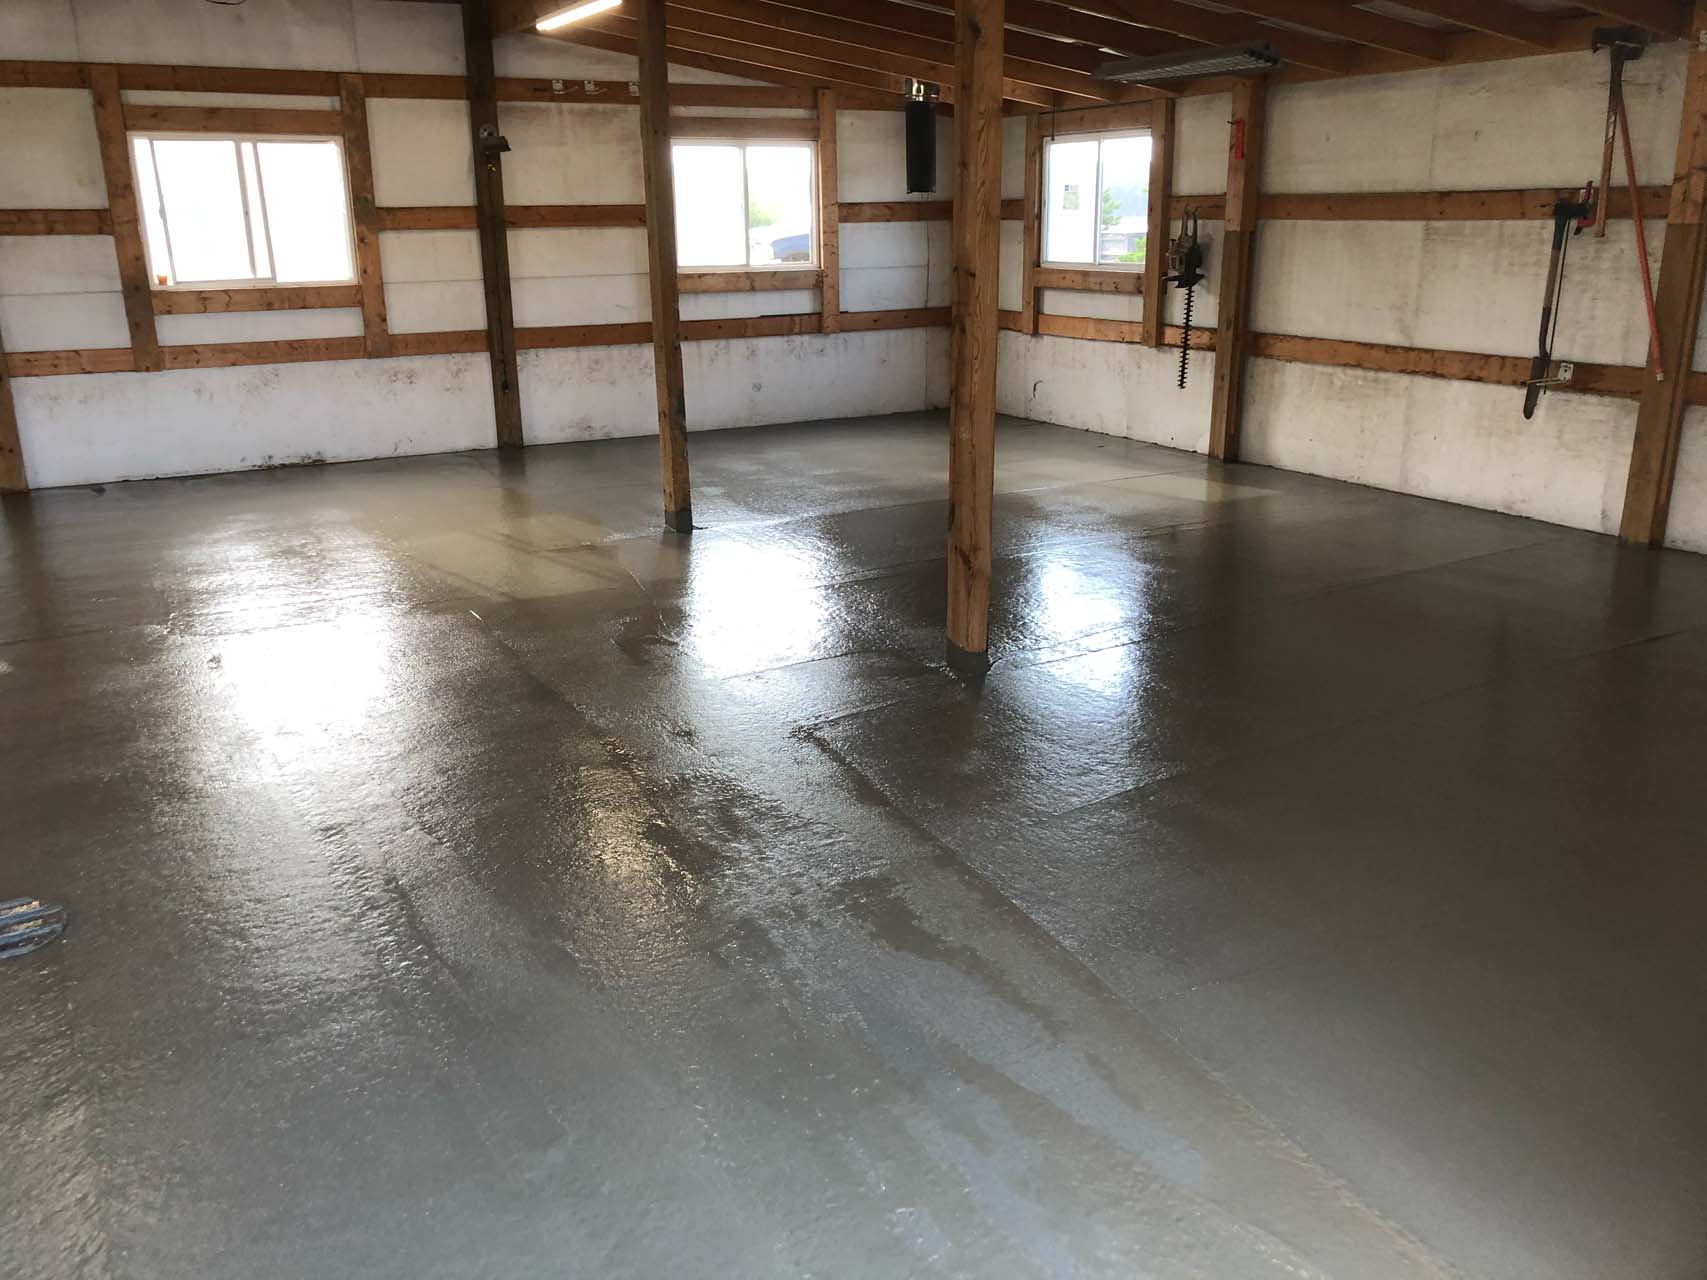 Freshly poured, and wet concrete floor